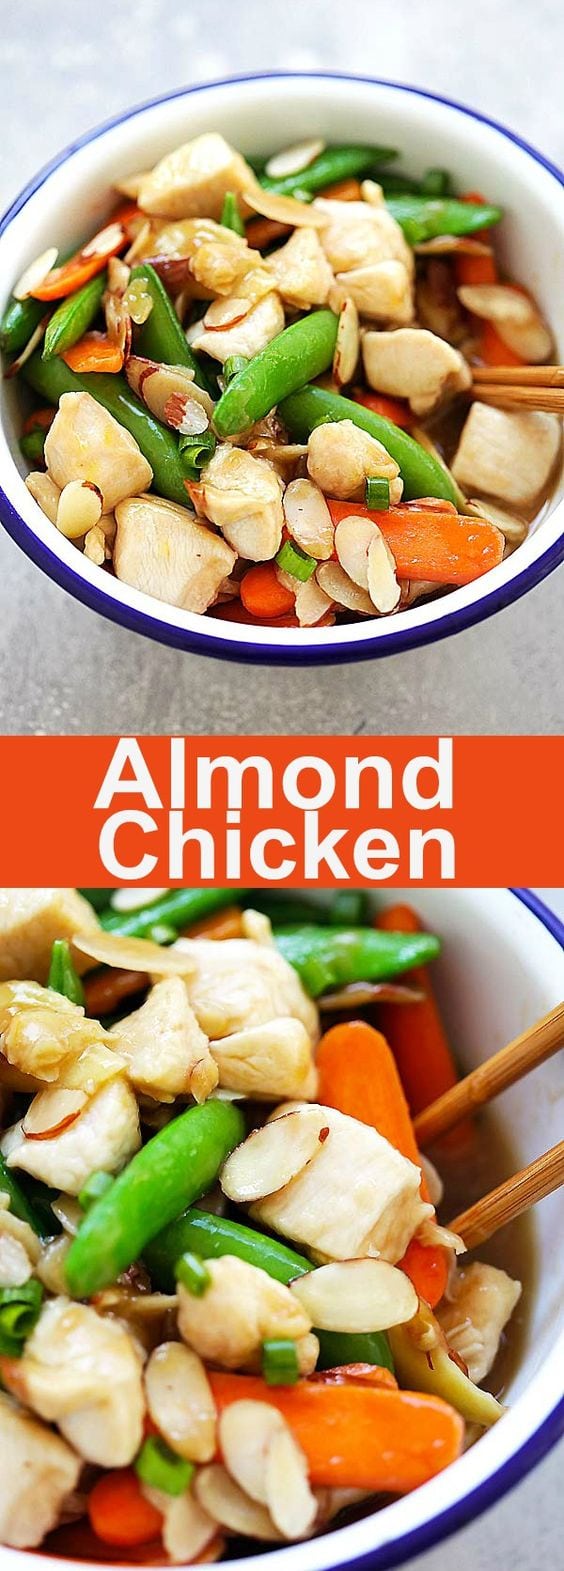 Almond Chicken - tender and juicy chicken stir-fry with almonds, peas and carrots in Chinese brown sauce. So good and much better than takeout | rasamalaysia.com